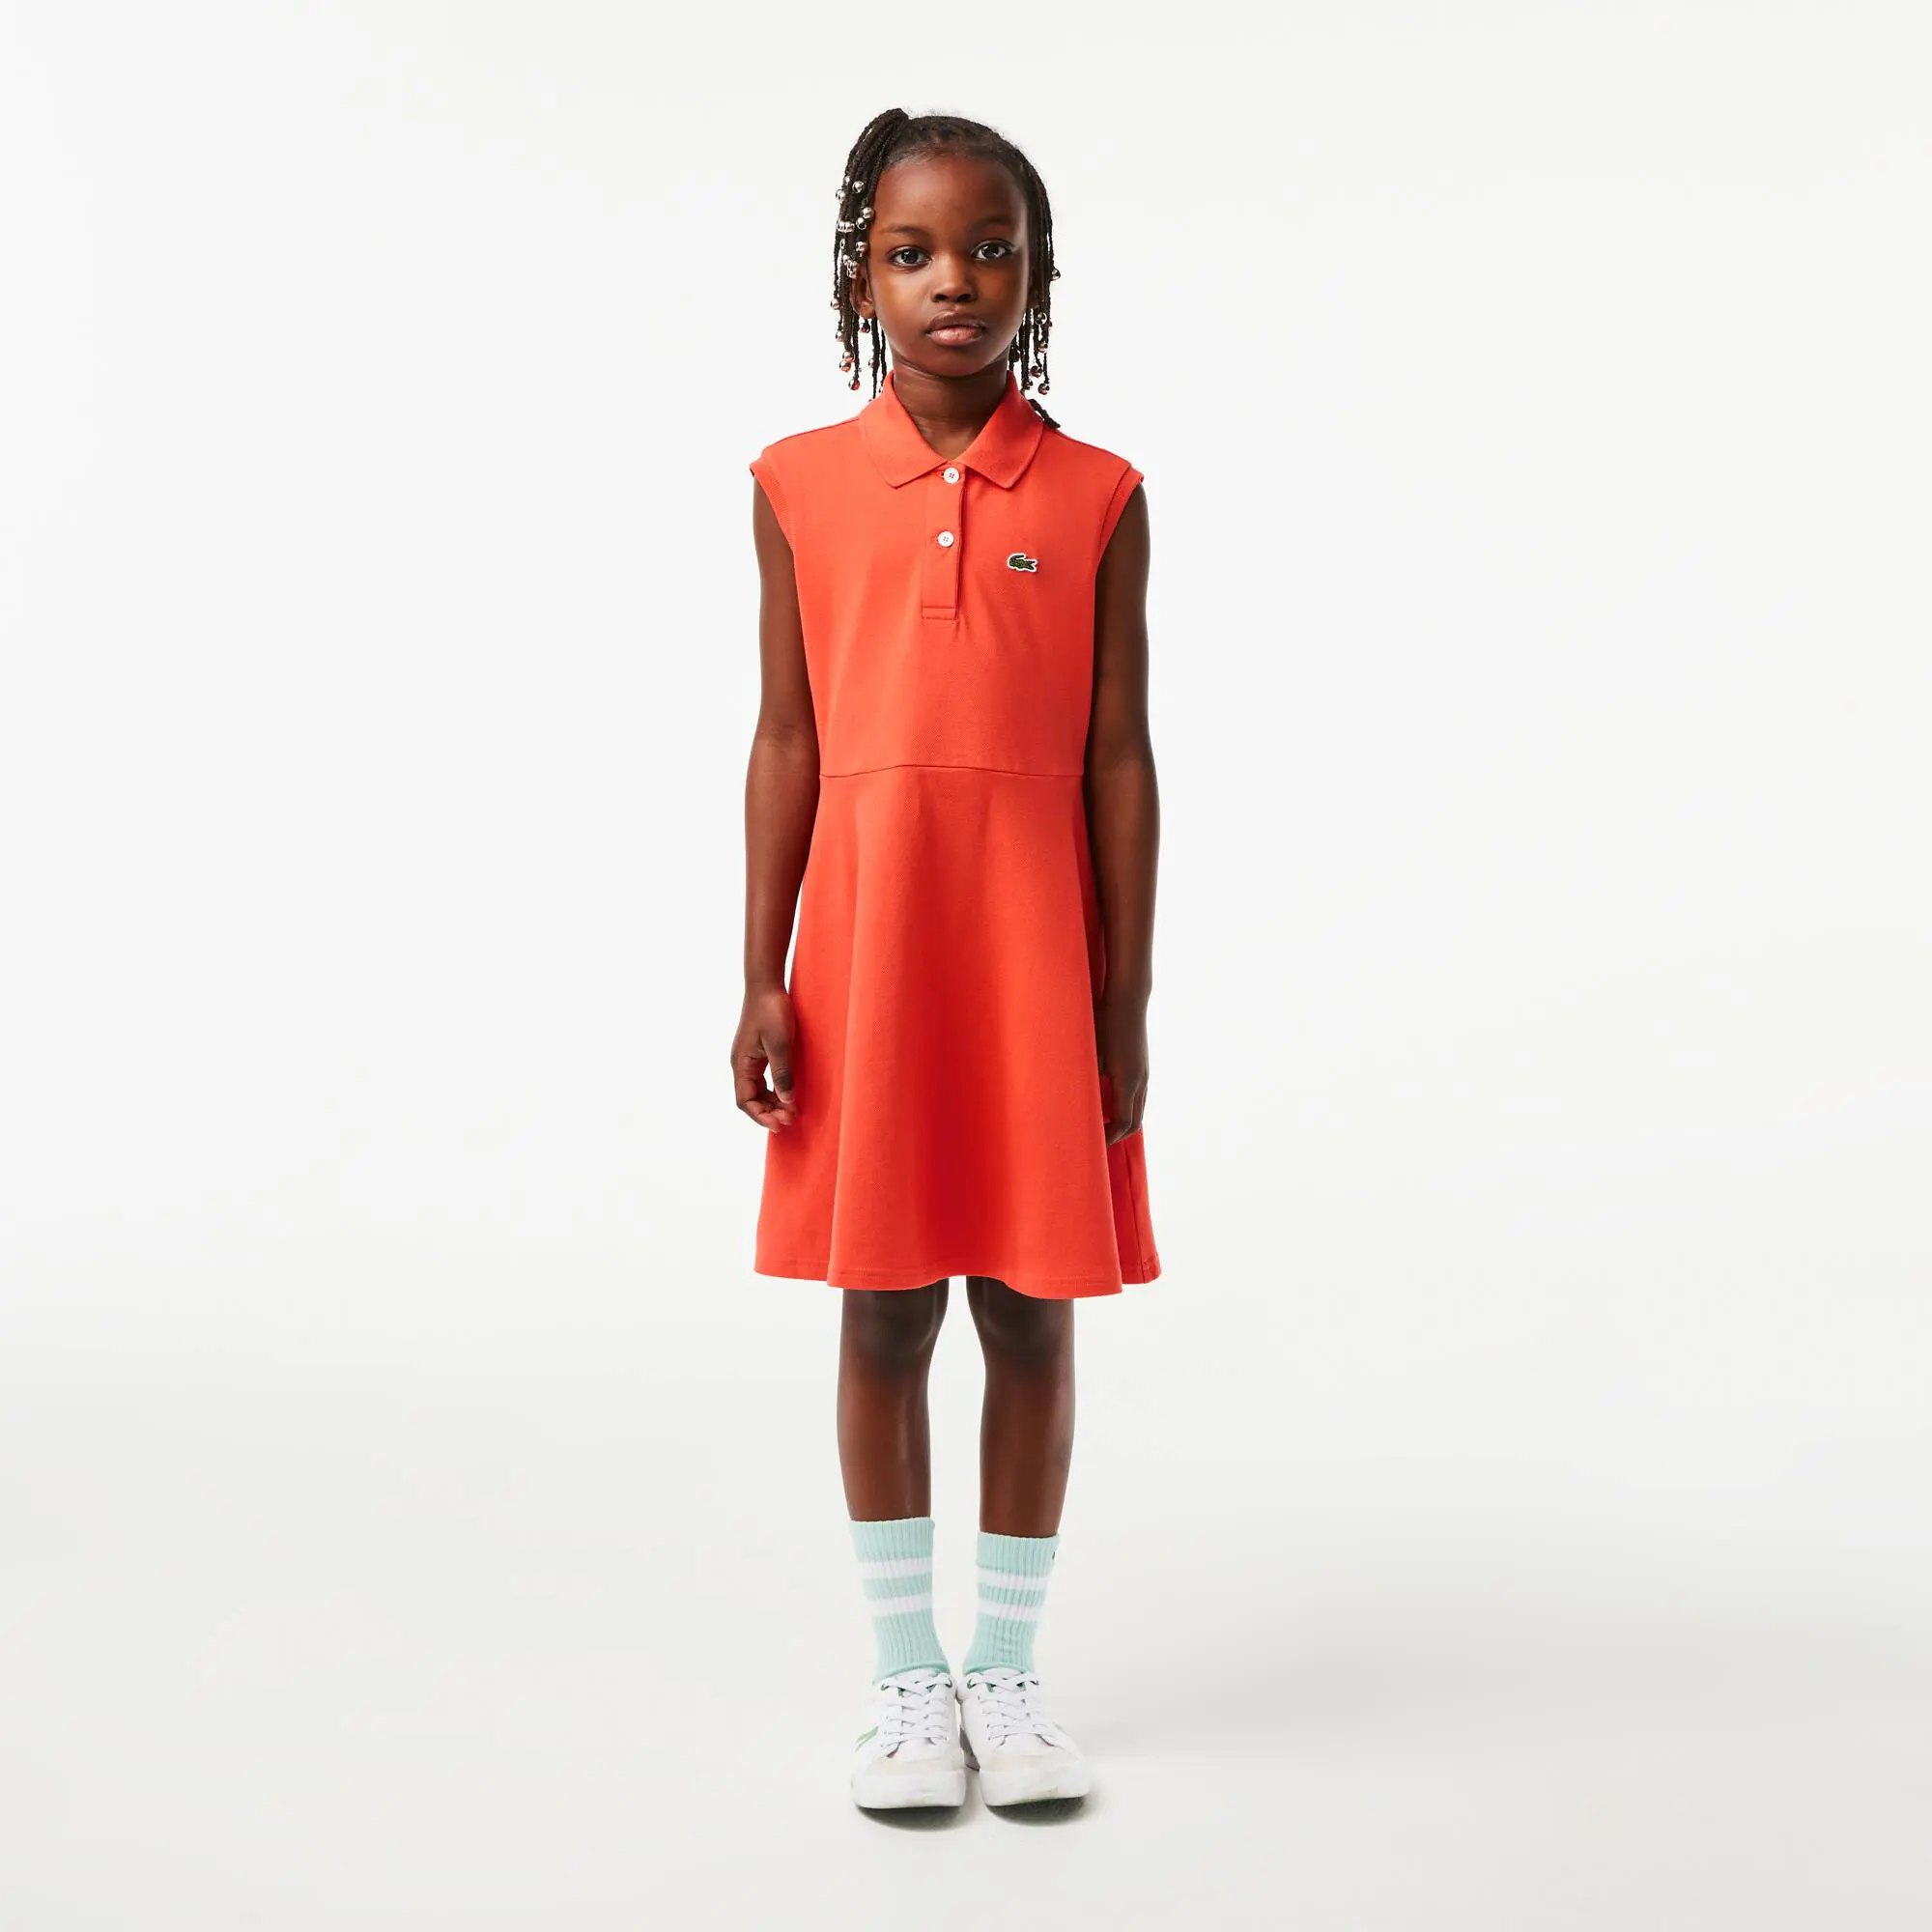 Lacoste Girls’ Lacoste Fit and Flare Stretch Piqué Polo Dress. 1